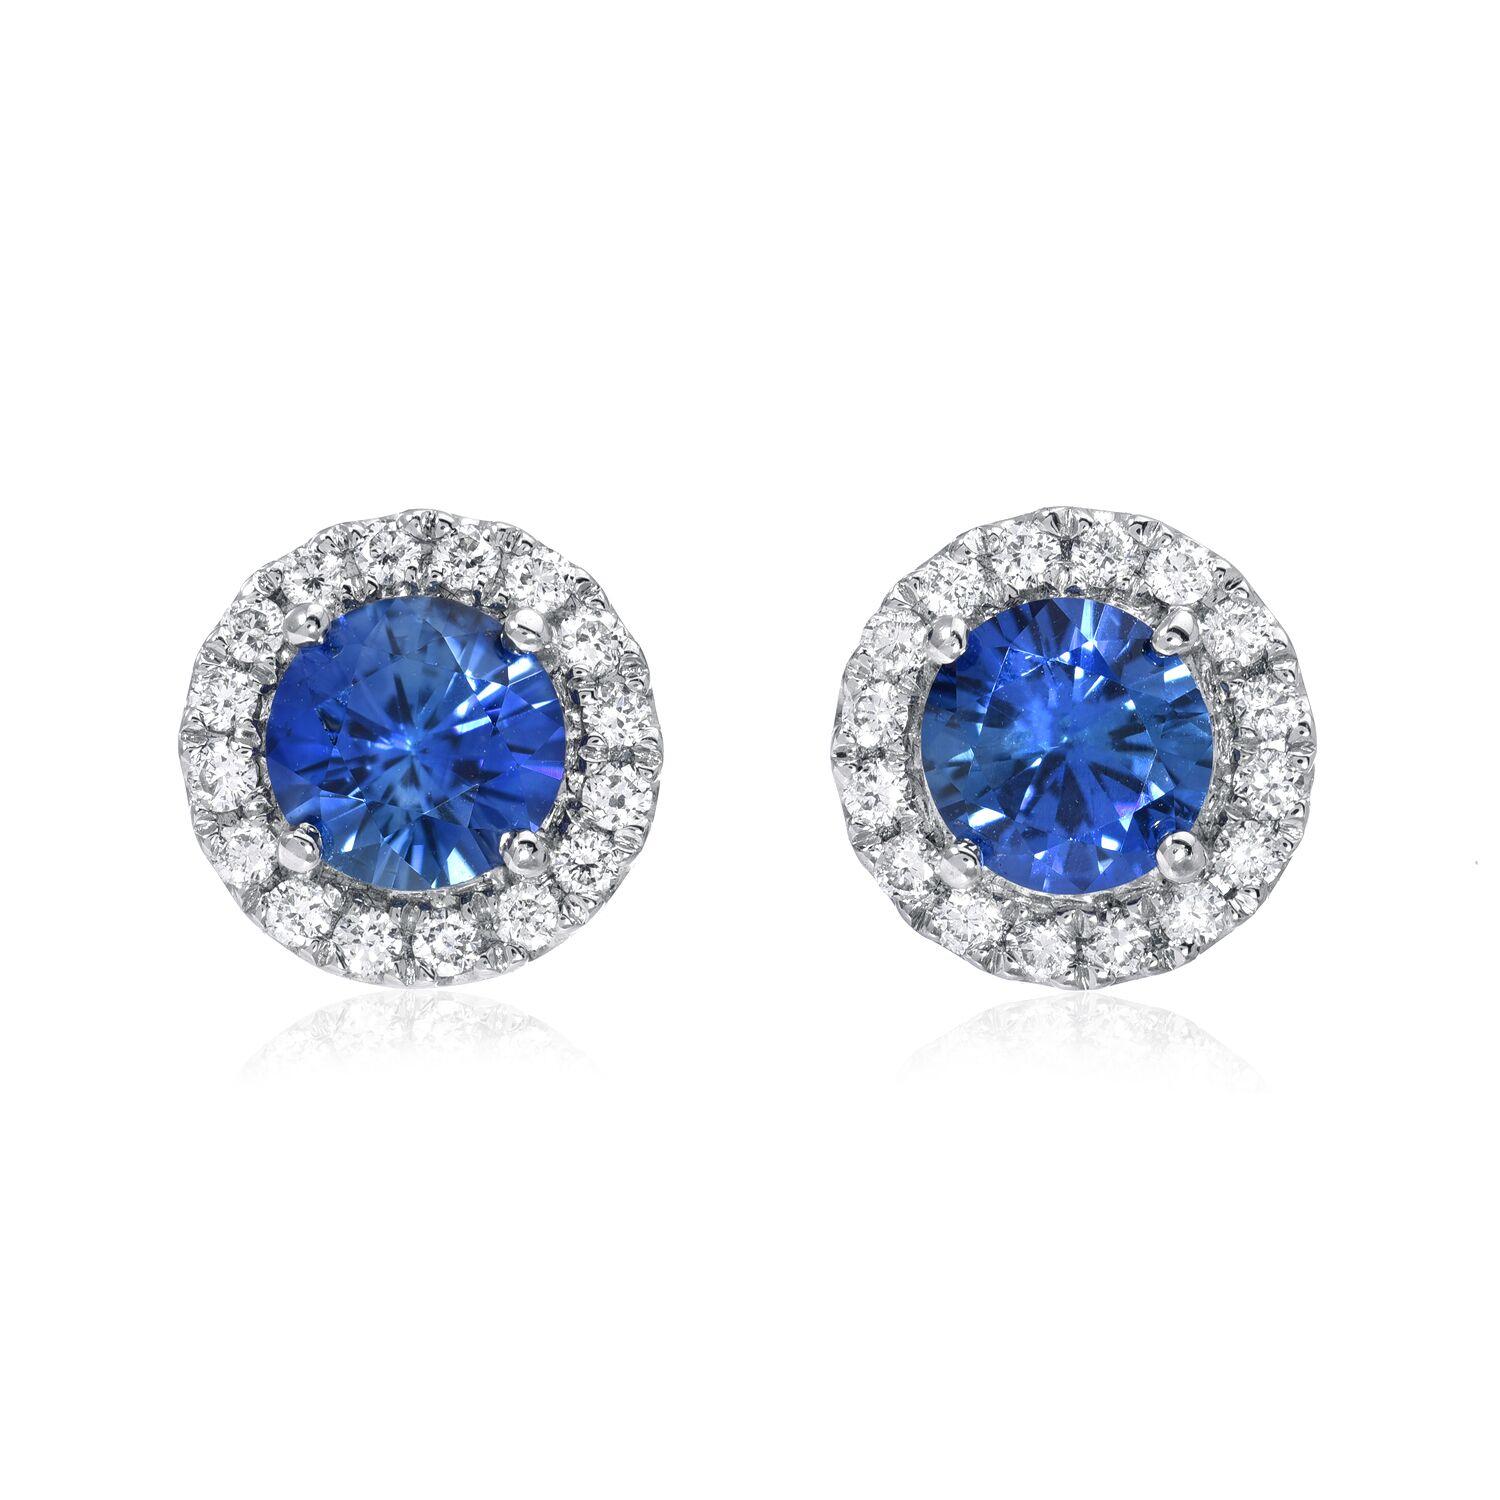 Sapphire Earrings Round 0.97 Carats (Moderne)